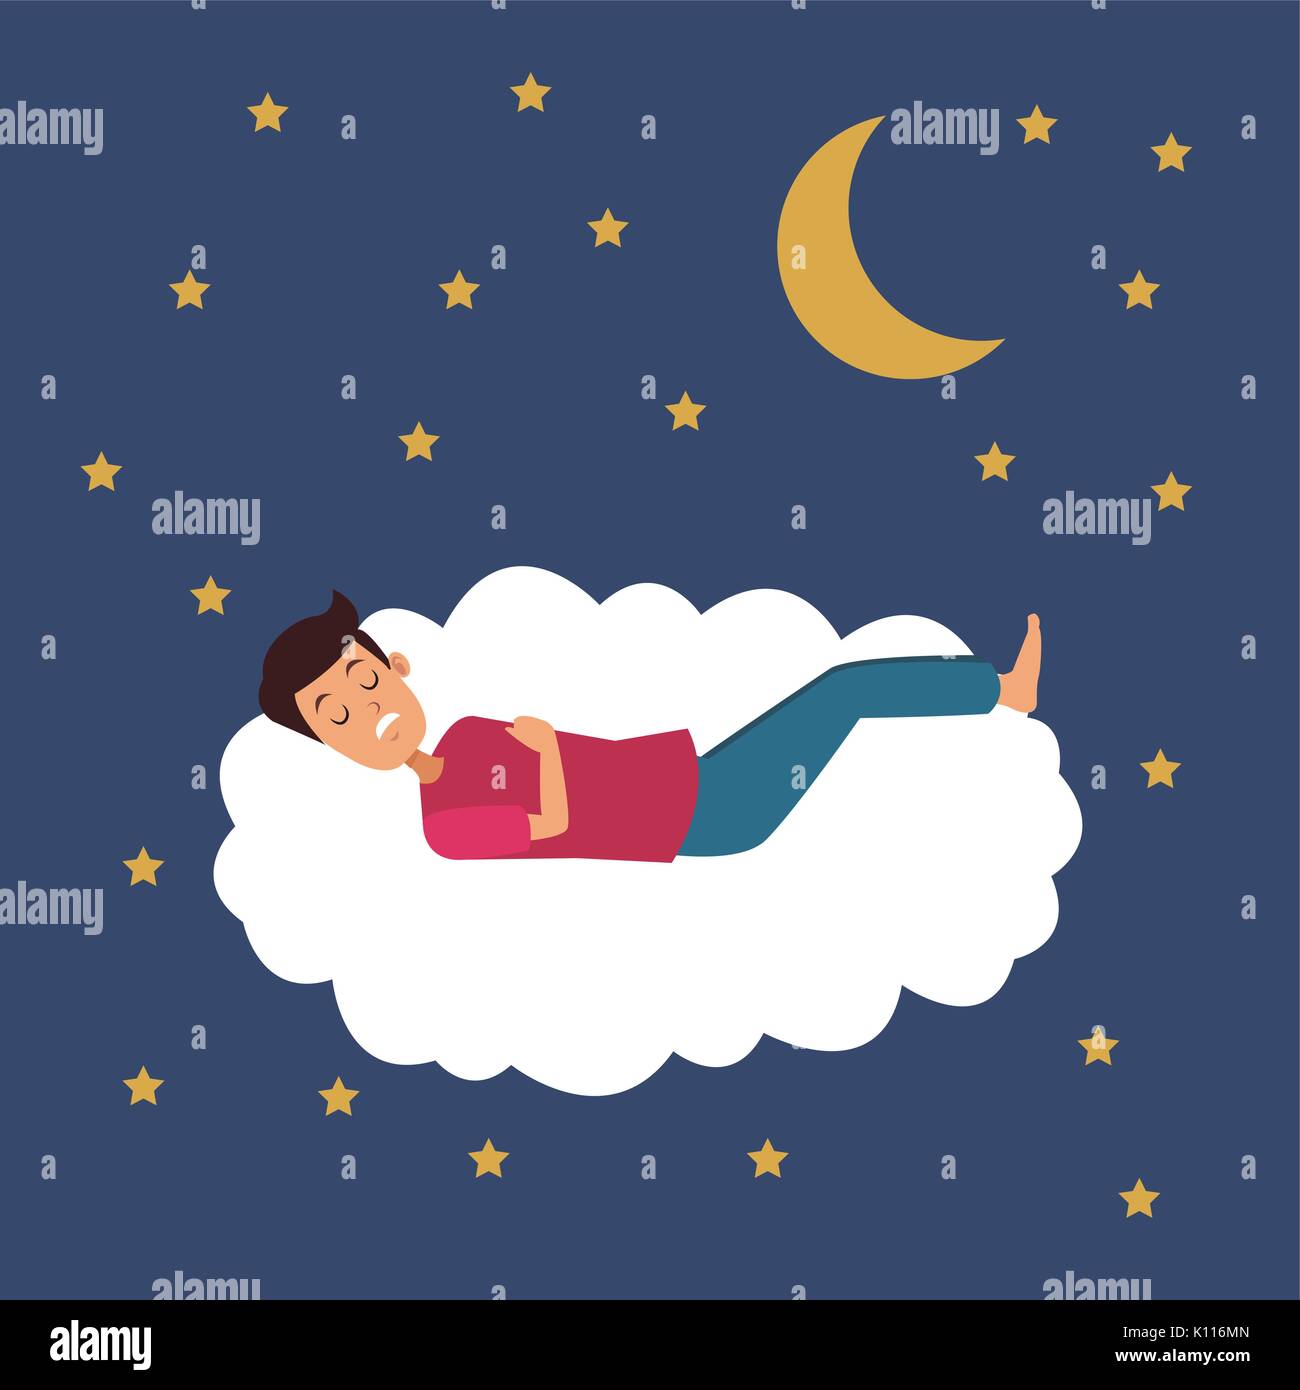 Colorful Scene Of Night With Guy Sleep In Cloud With Moon And Stars